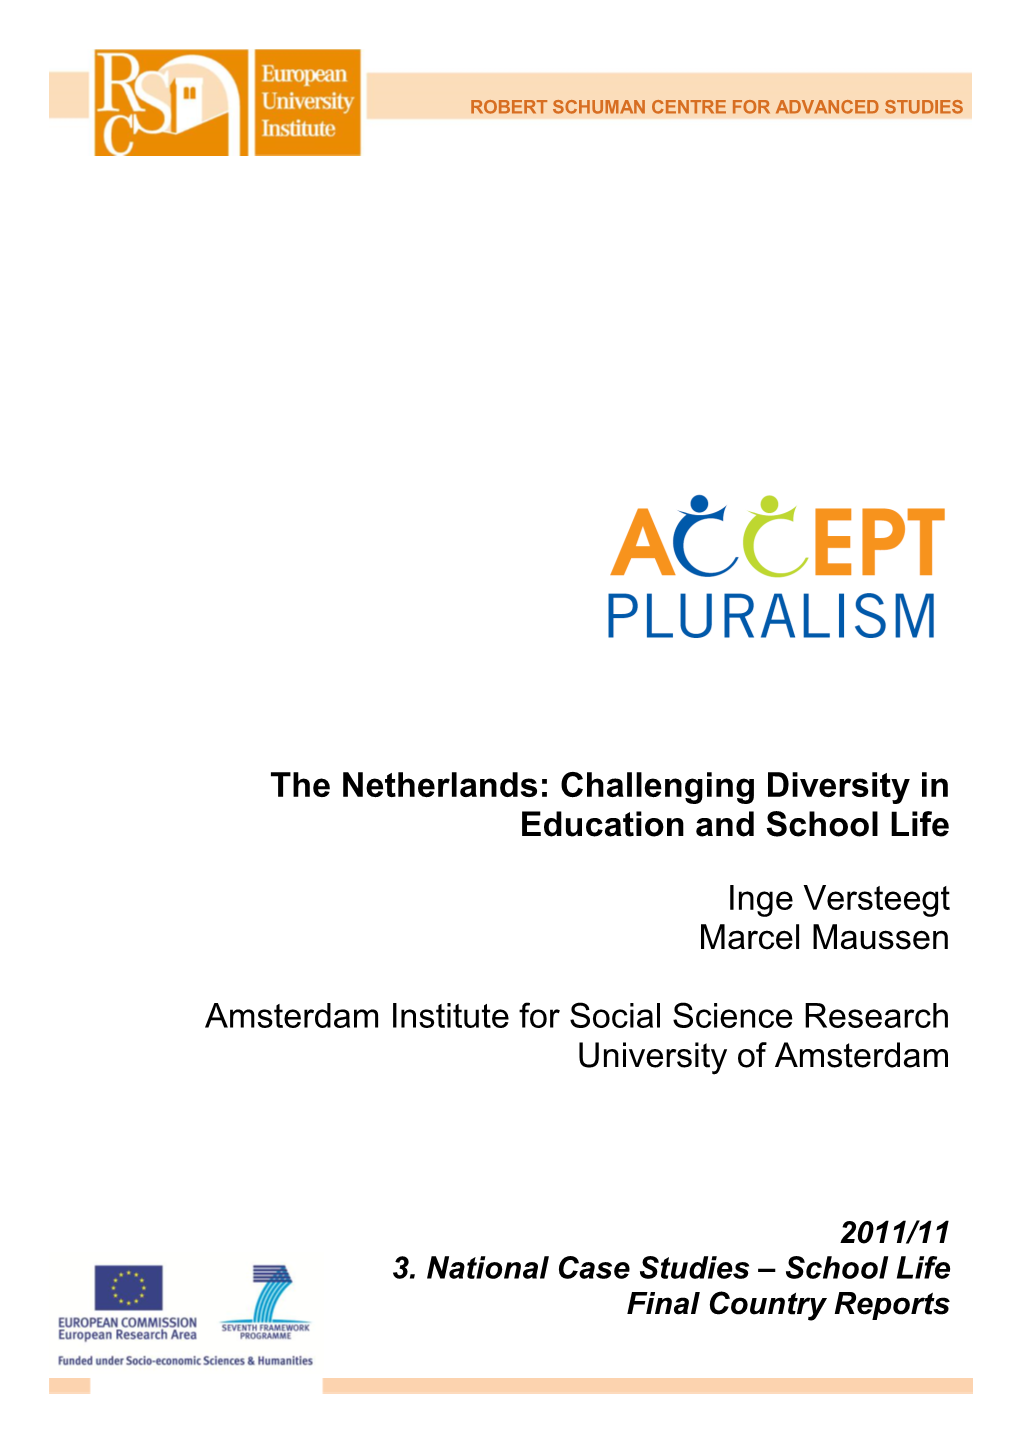 Challenging Diversity in Education and School Life